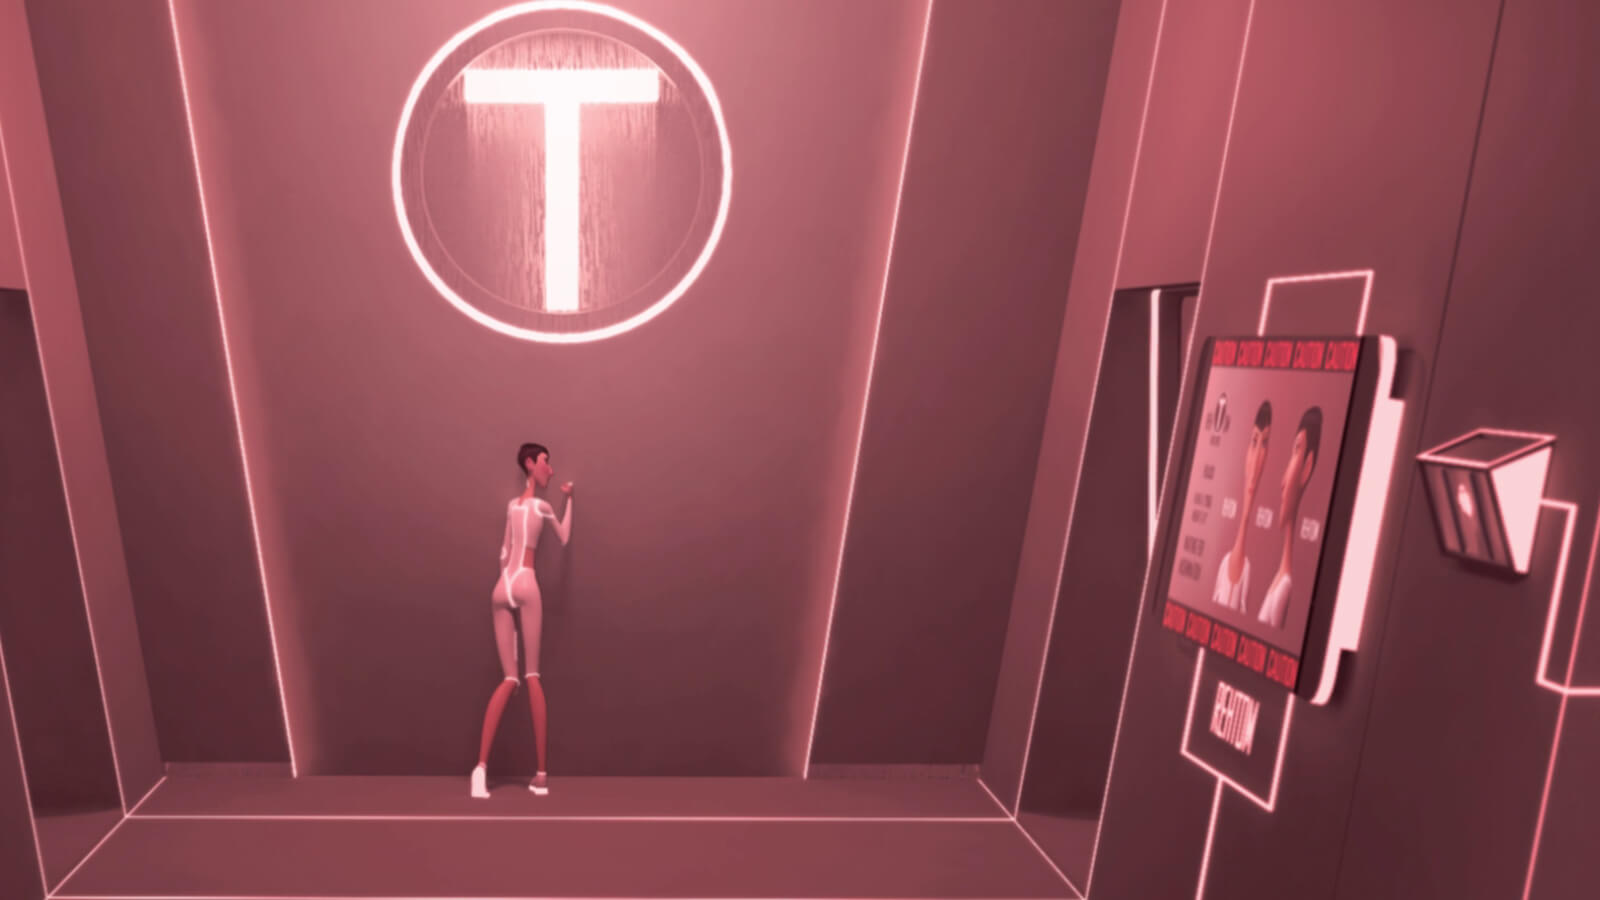 A tall, thin woman wearing futuristic white clothing leans against a pink-lit wall with a glowing T logo above her